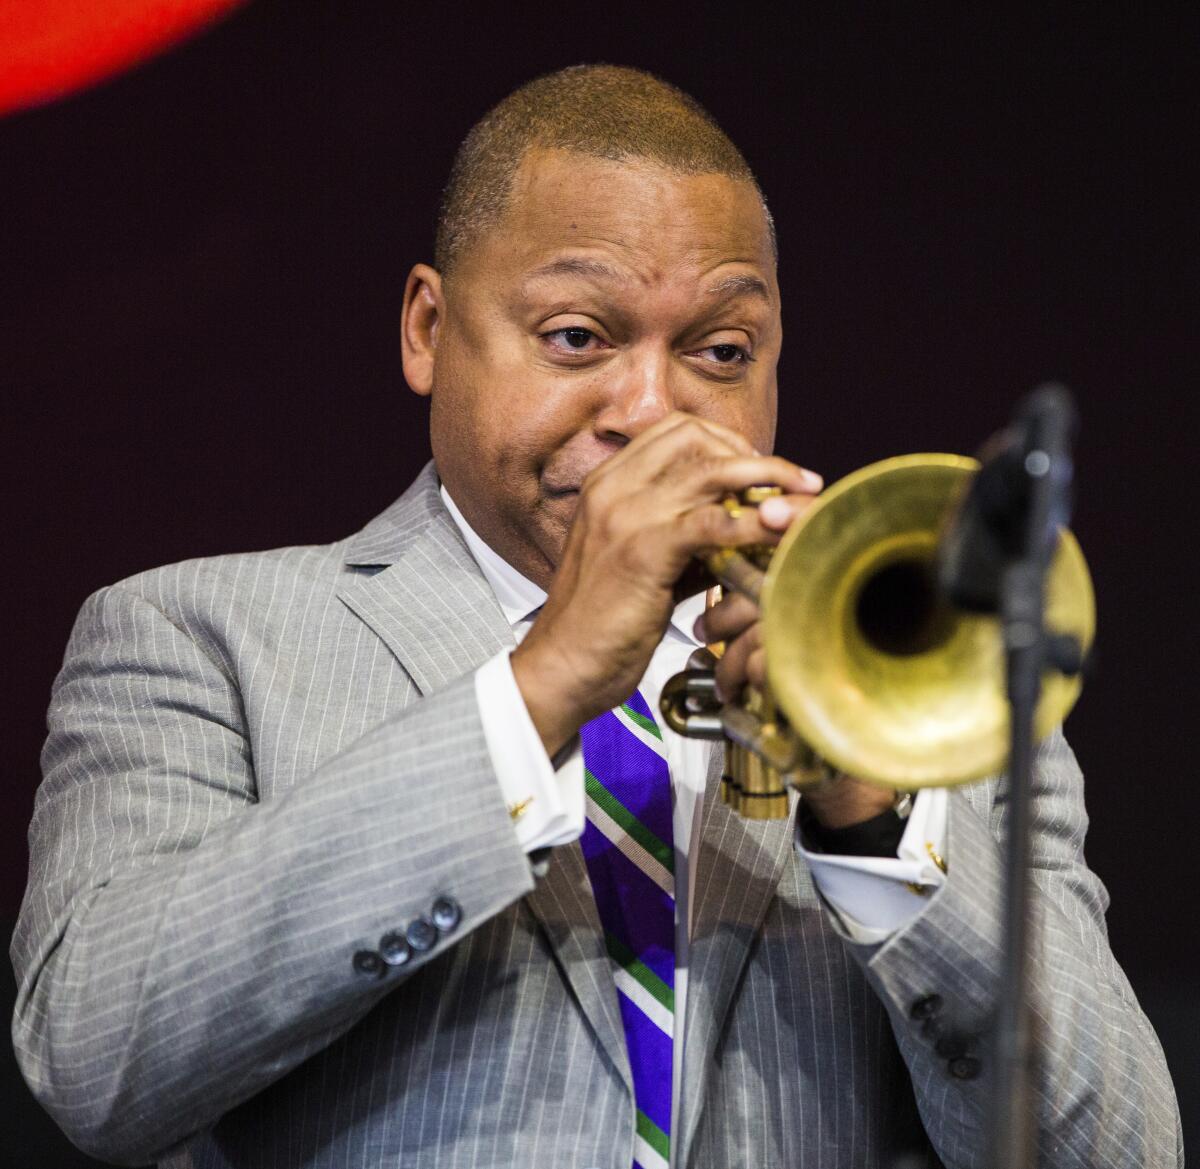 A man in a gray pinstripe suit and purple tie plays a trumpet into a microphone.